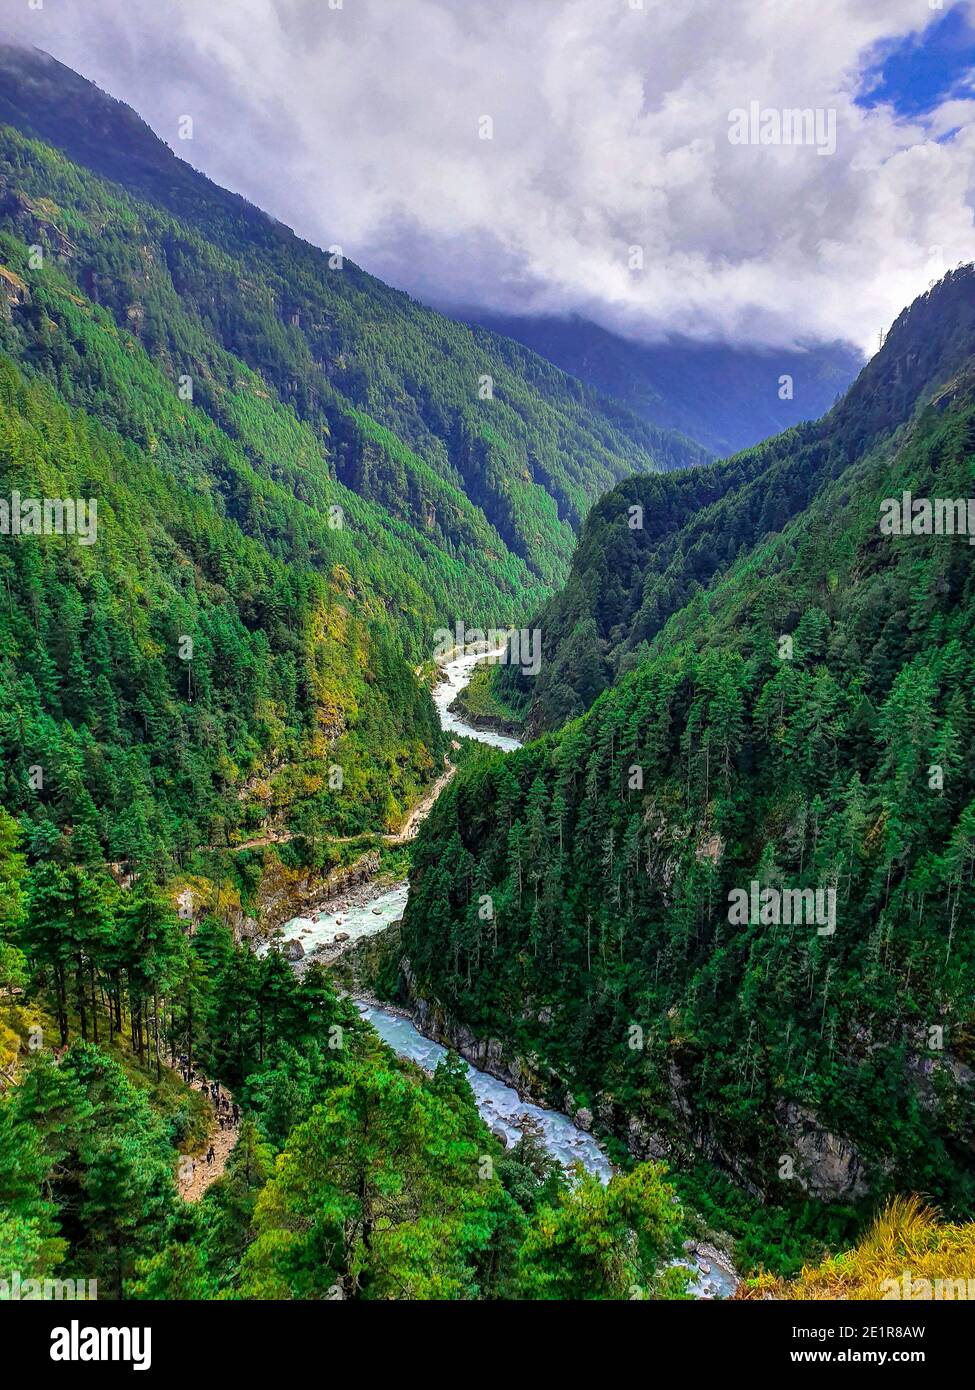 High altitude travel / landscape photography during a trekking and mountain climbing expedition through the Himalayas in Nepal. Stock Photo